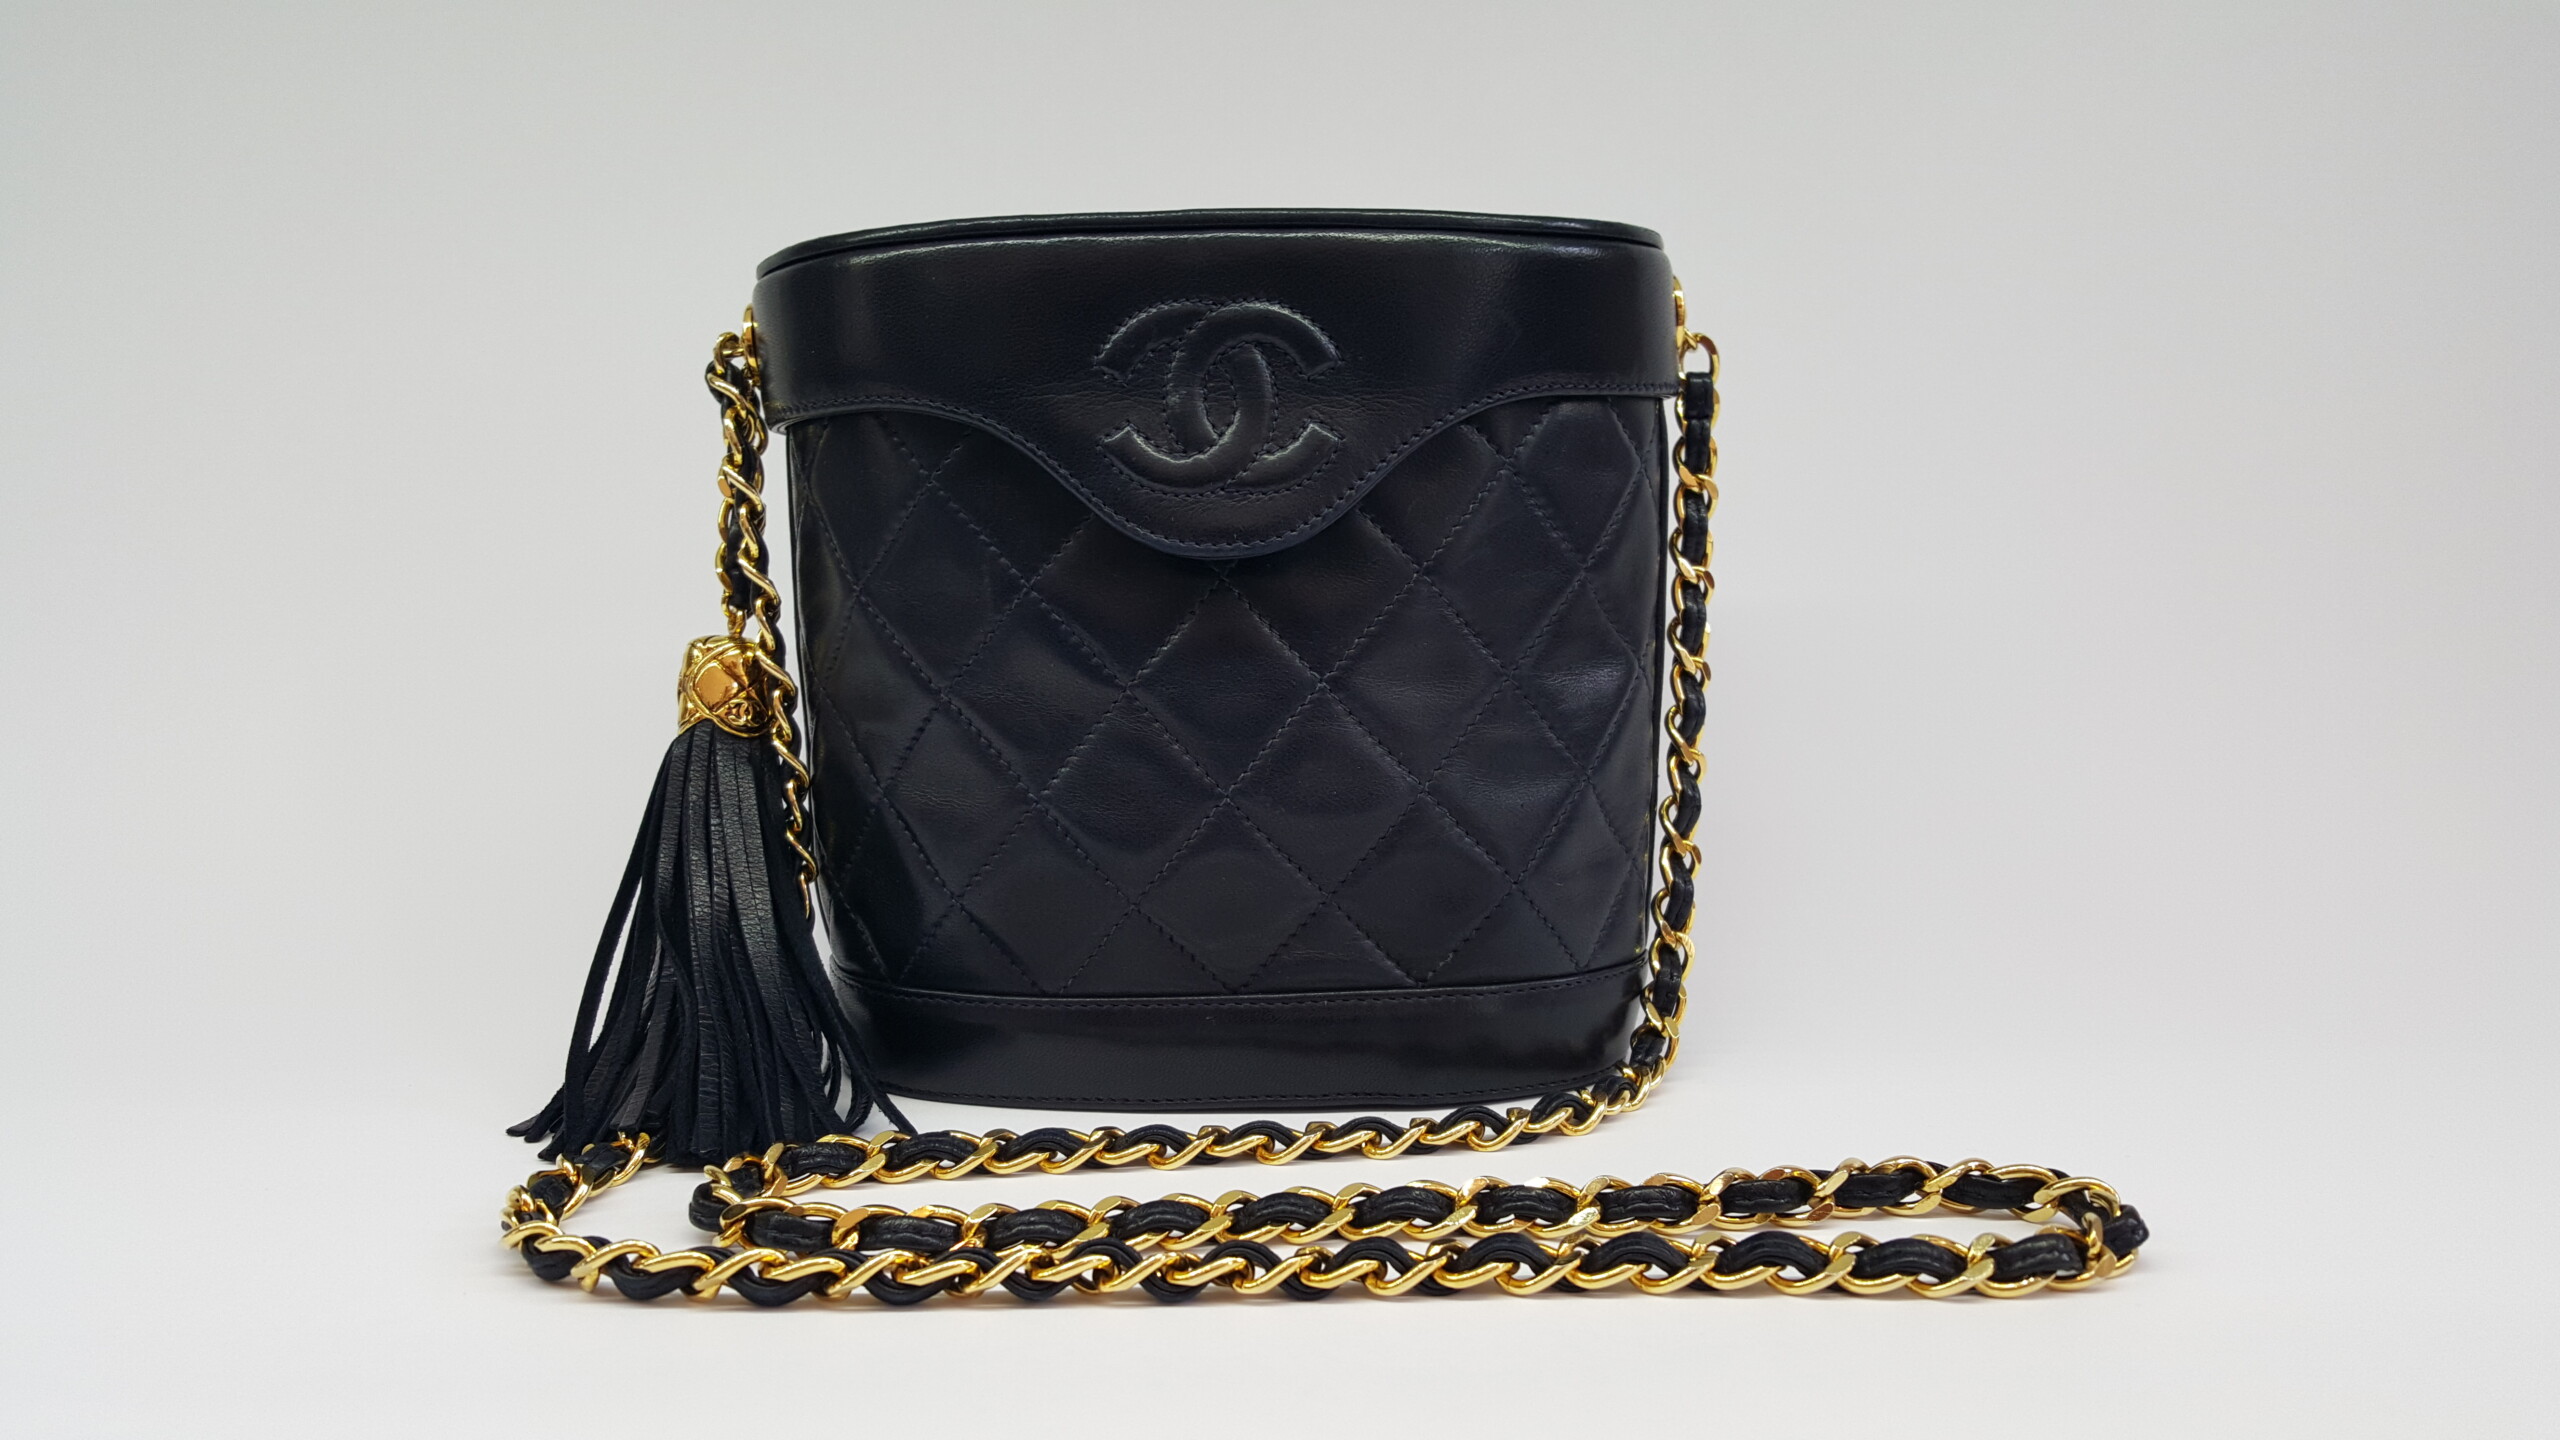 Chanel Navy Blue Leather Chain Strap Vintage Bag